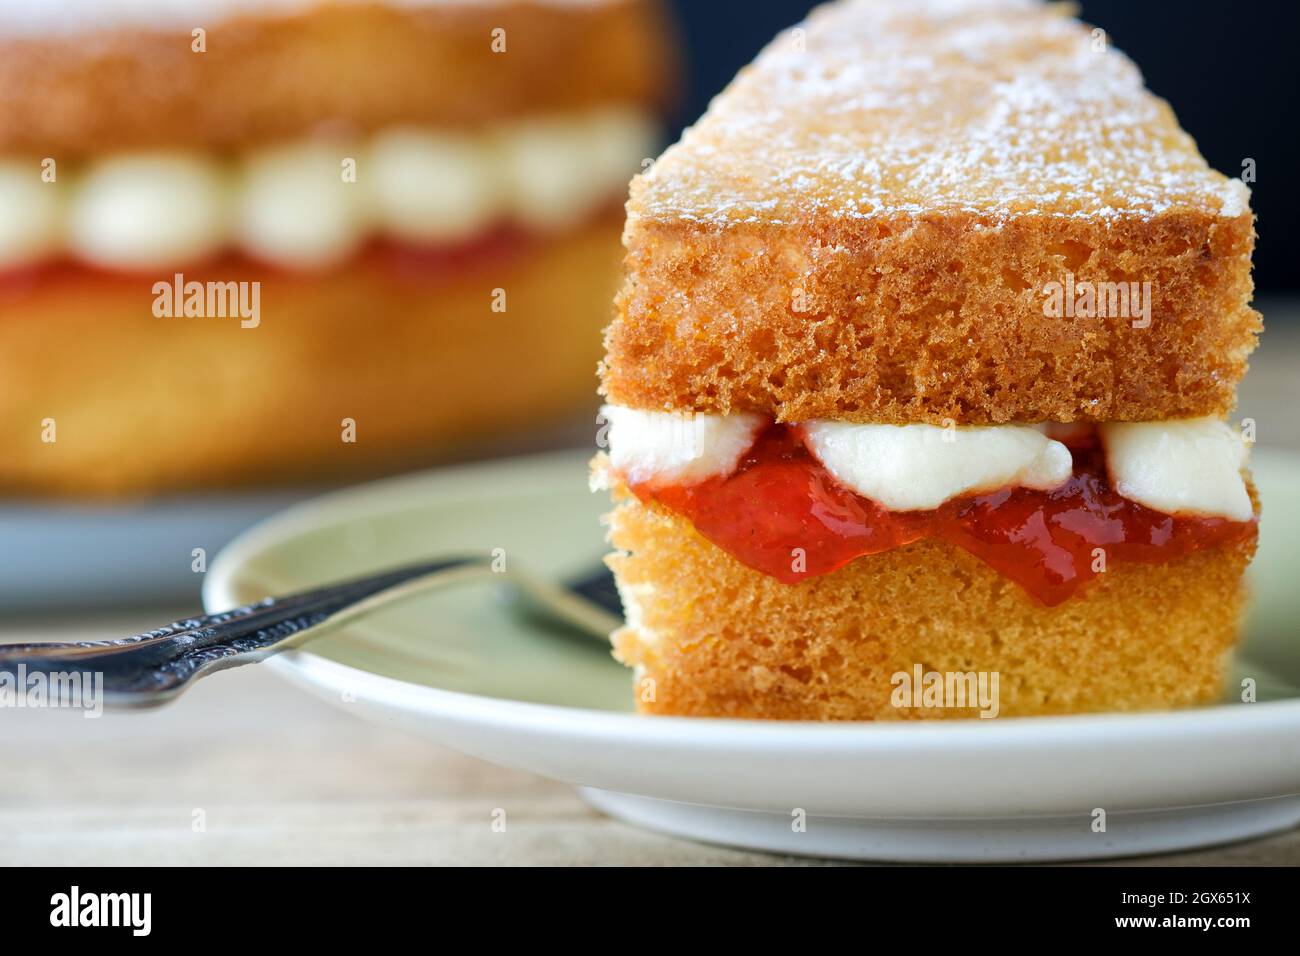 A serving, or slice, of a freshly home made Victoria Sponge and sandwich cake, The cake has a strawberry jam and butter cream filling Stock Photo